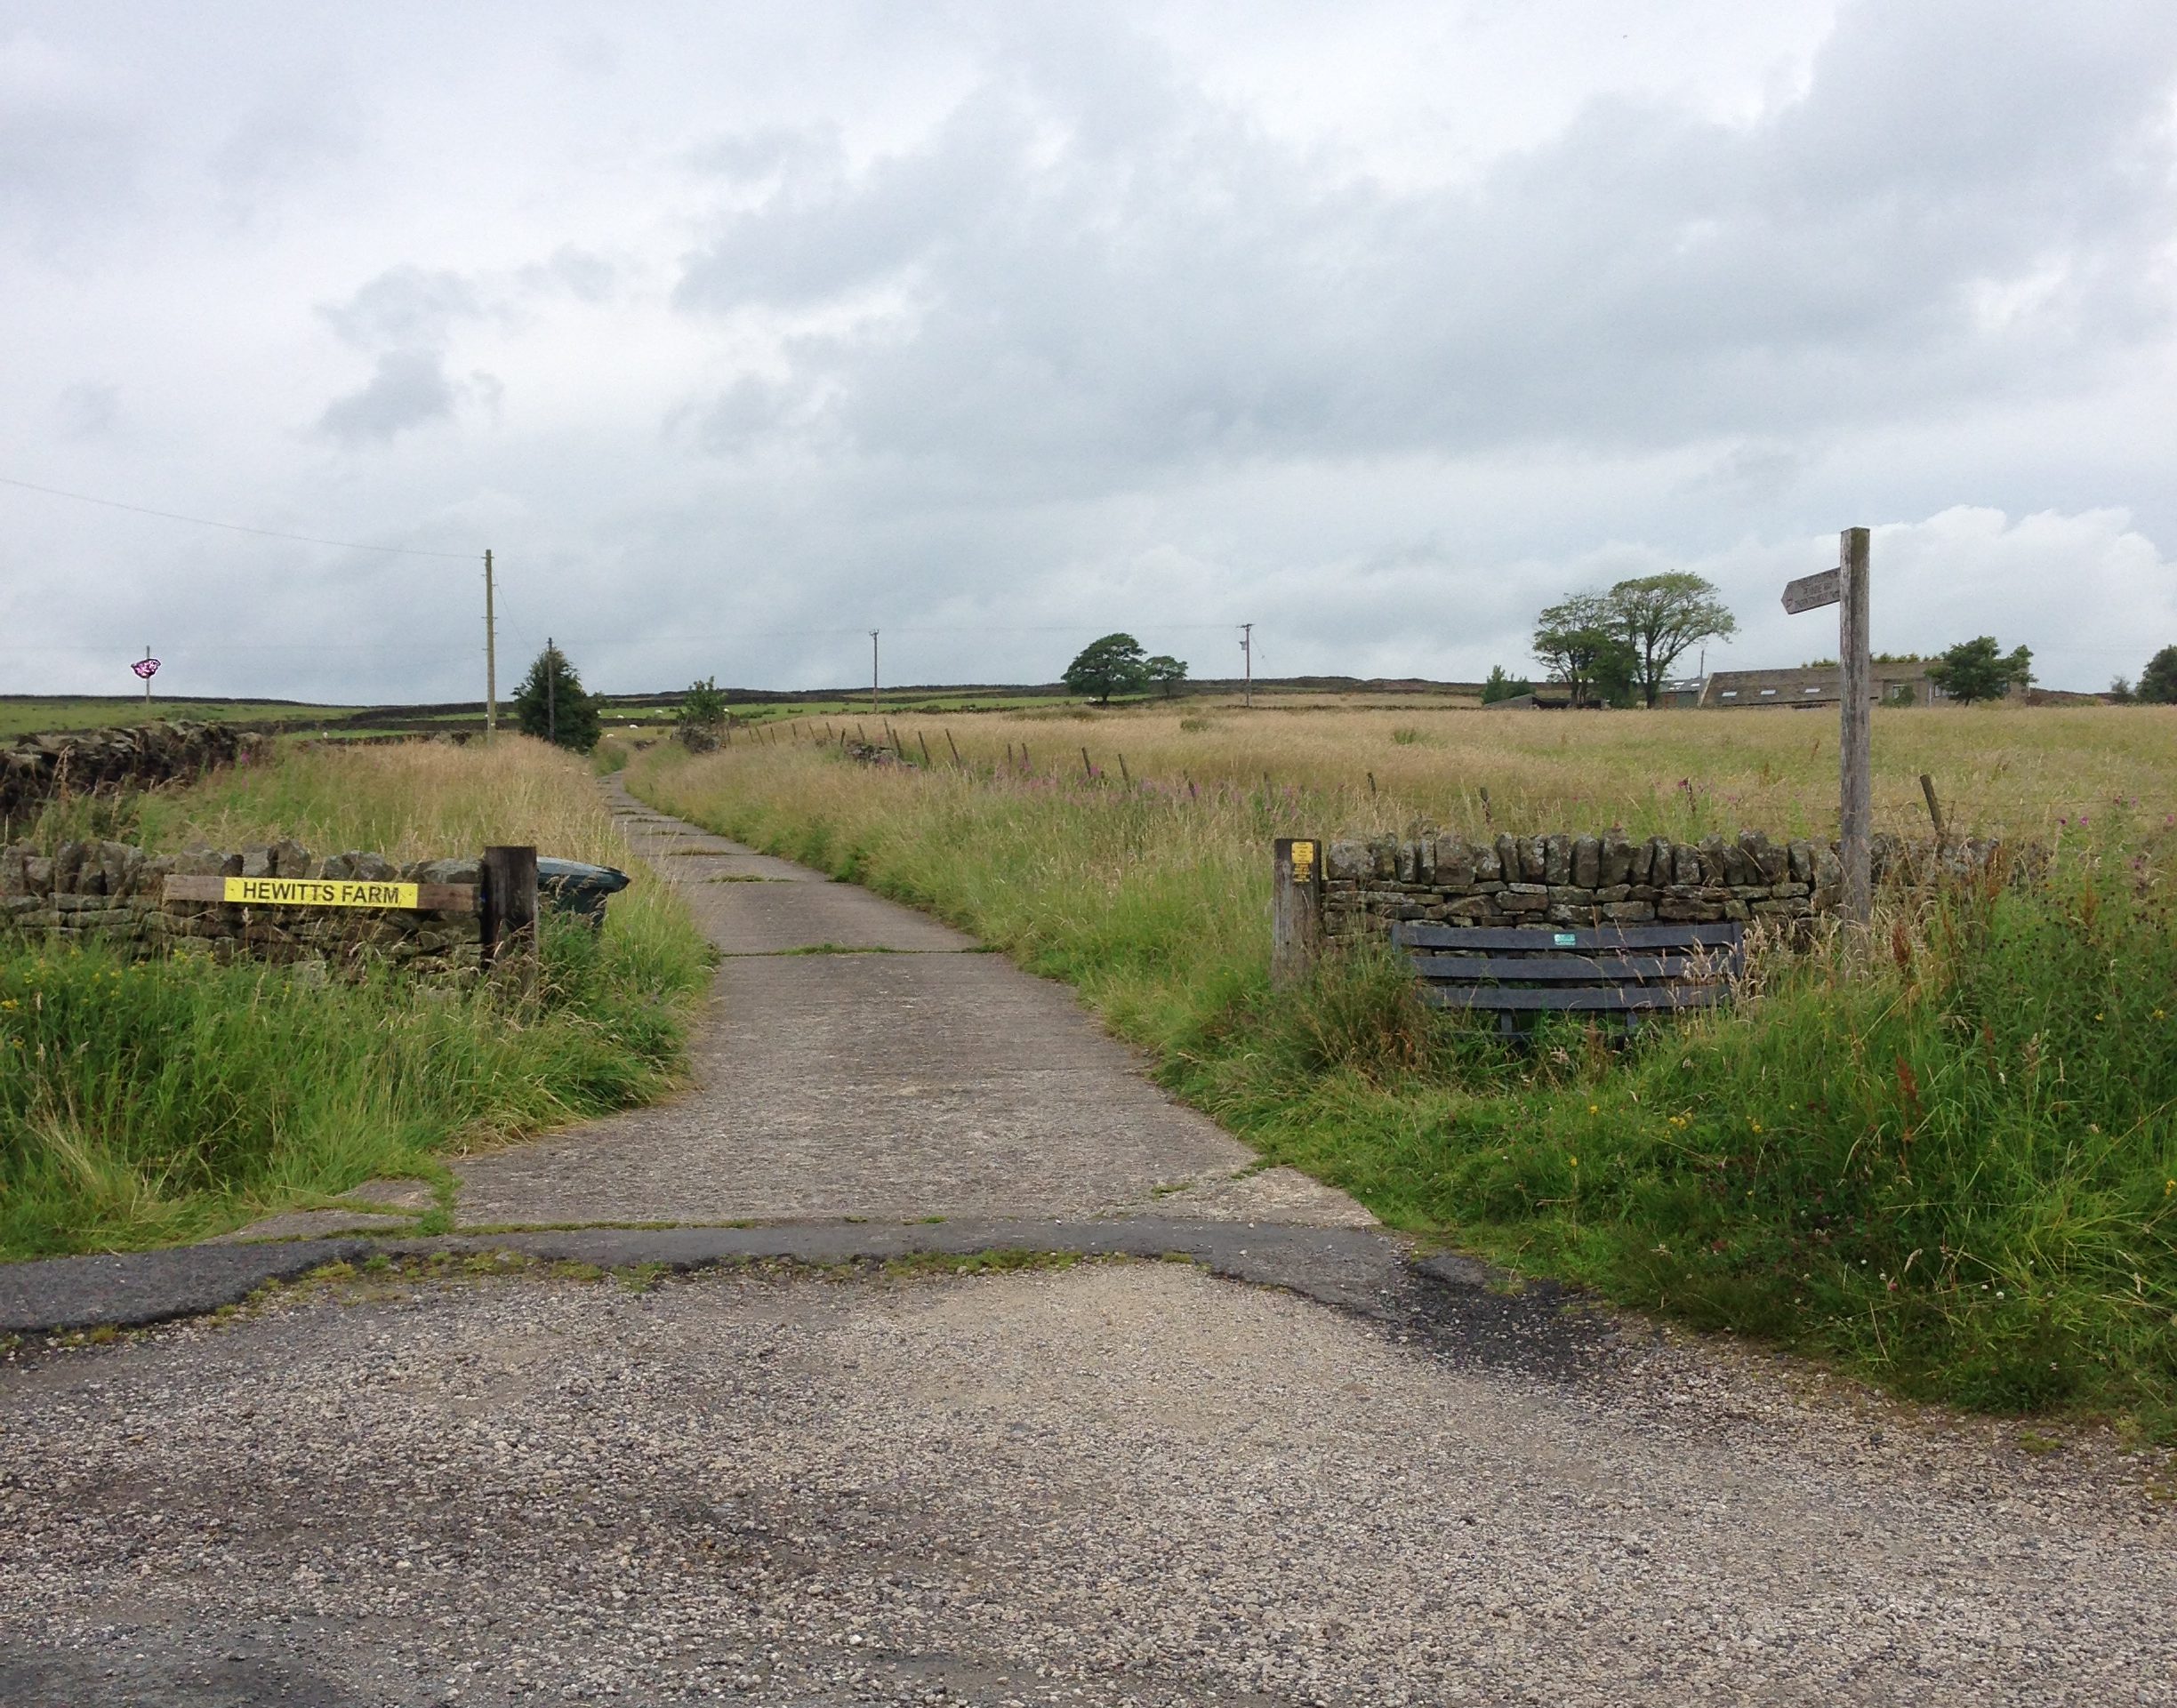 Heading north: The path up to Gargrave before the turn off for Skipton